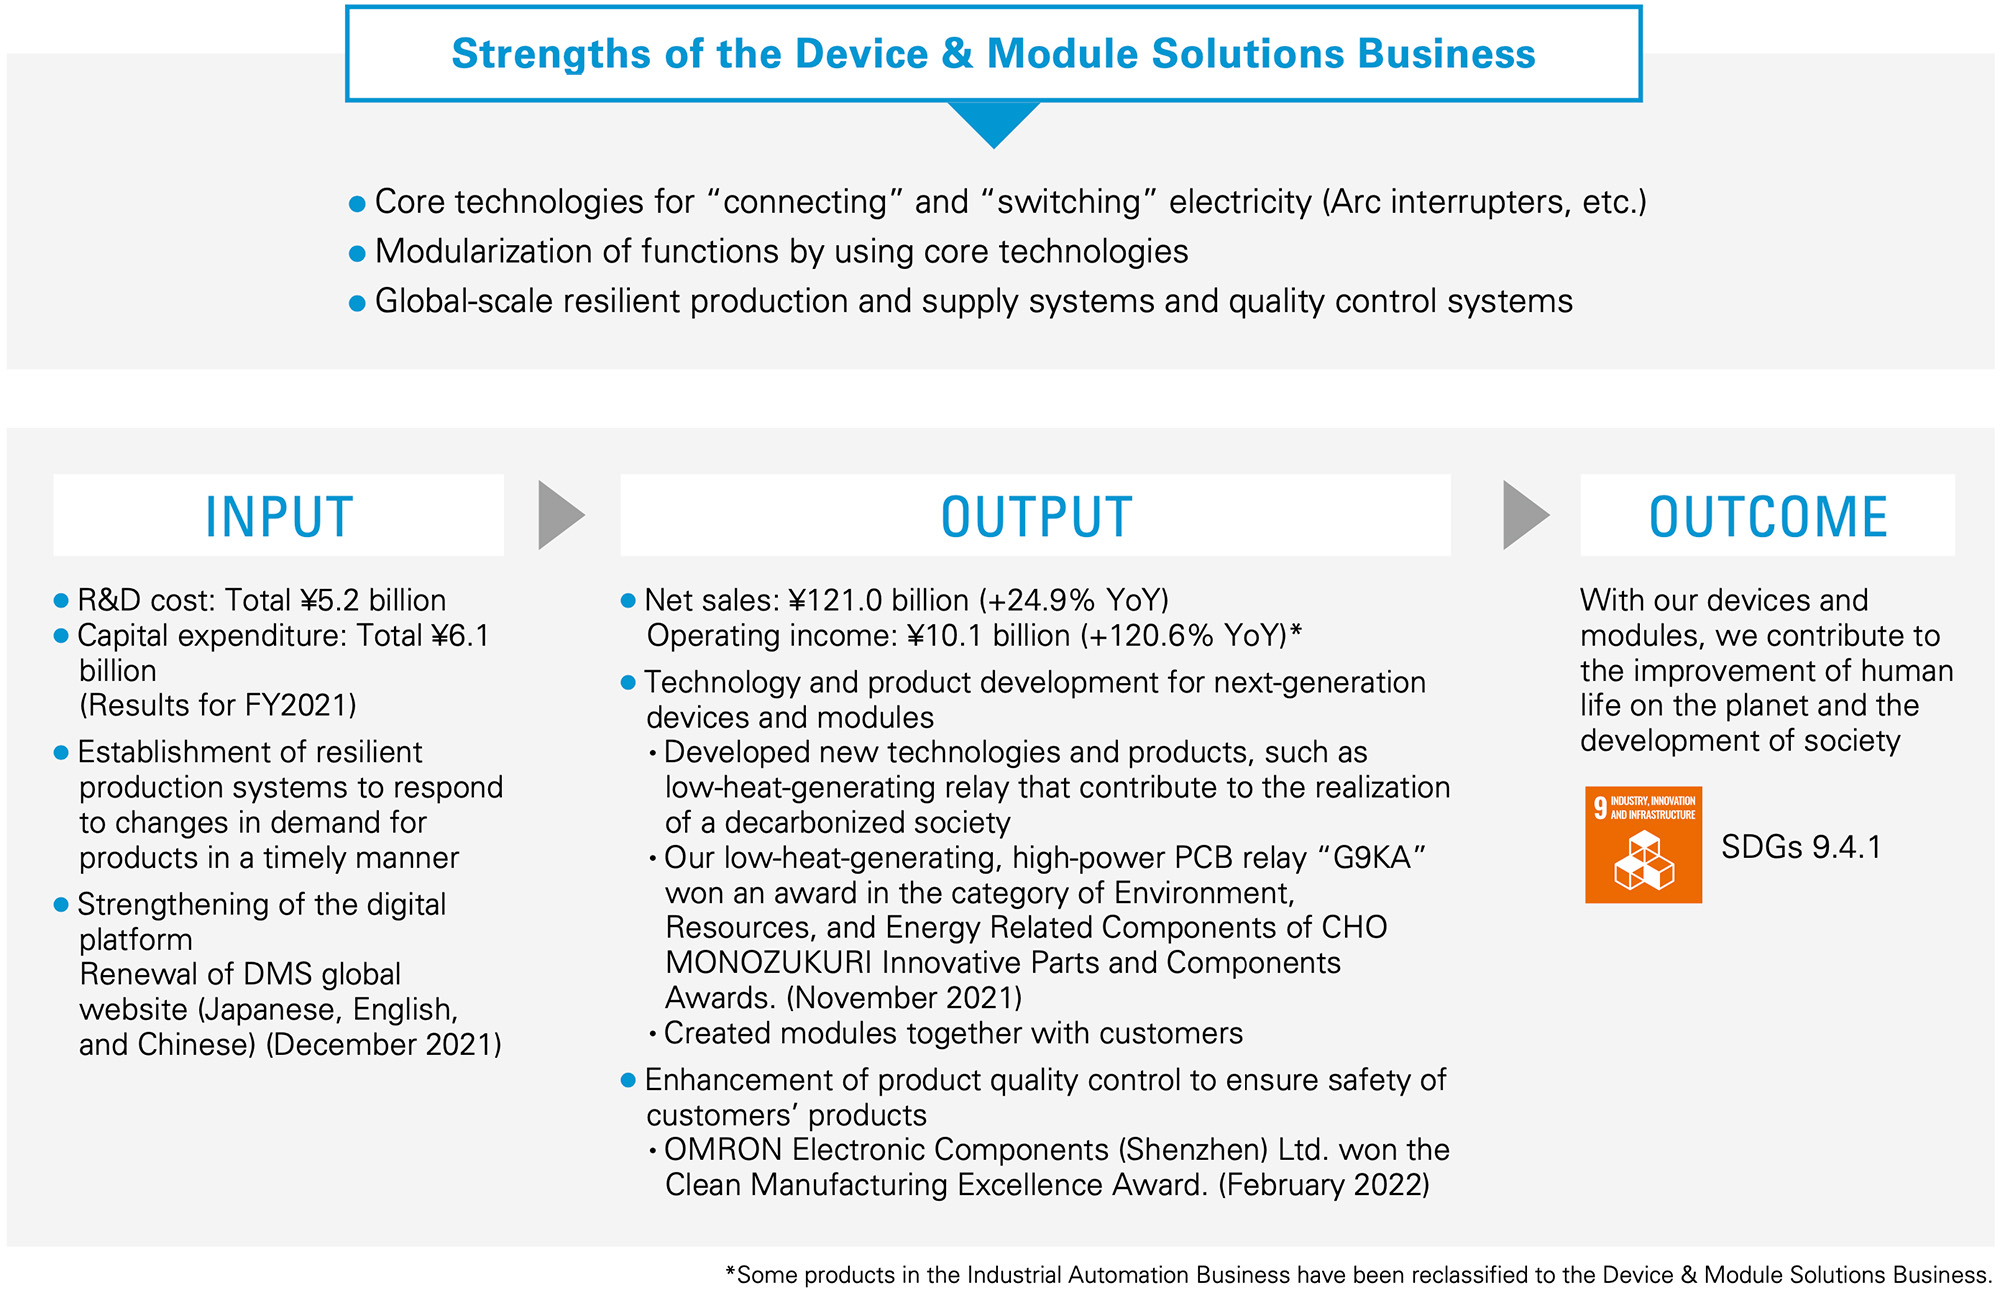 Strengths of the Device & Module Solutions Business